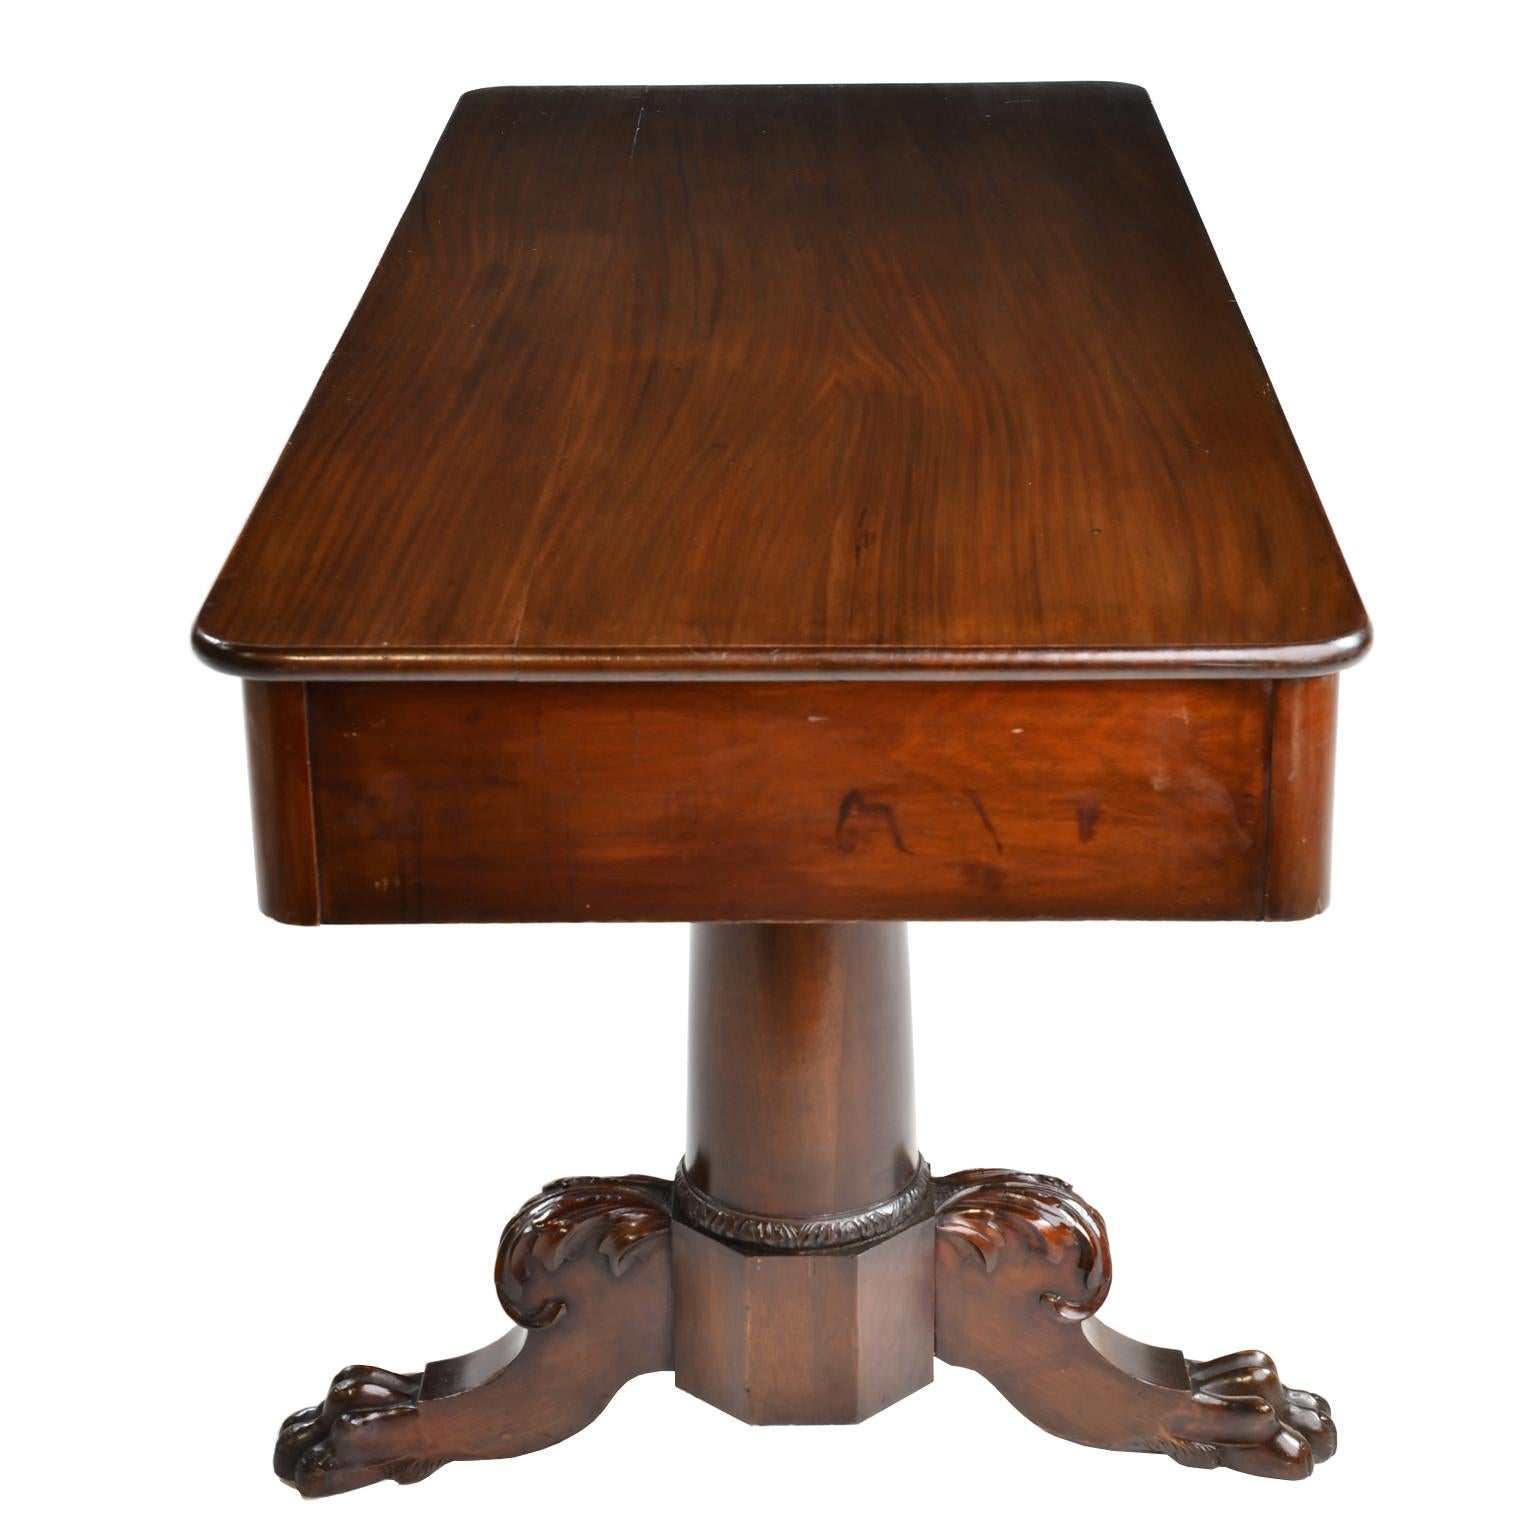 Antique Classical American Philadelphia Desk in Mahogany with Double Pedestal For Sale 1